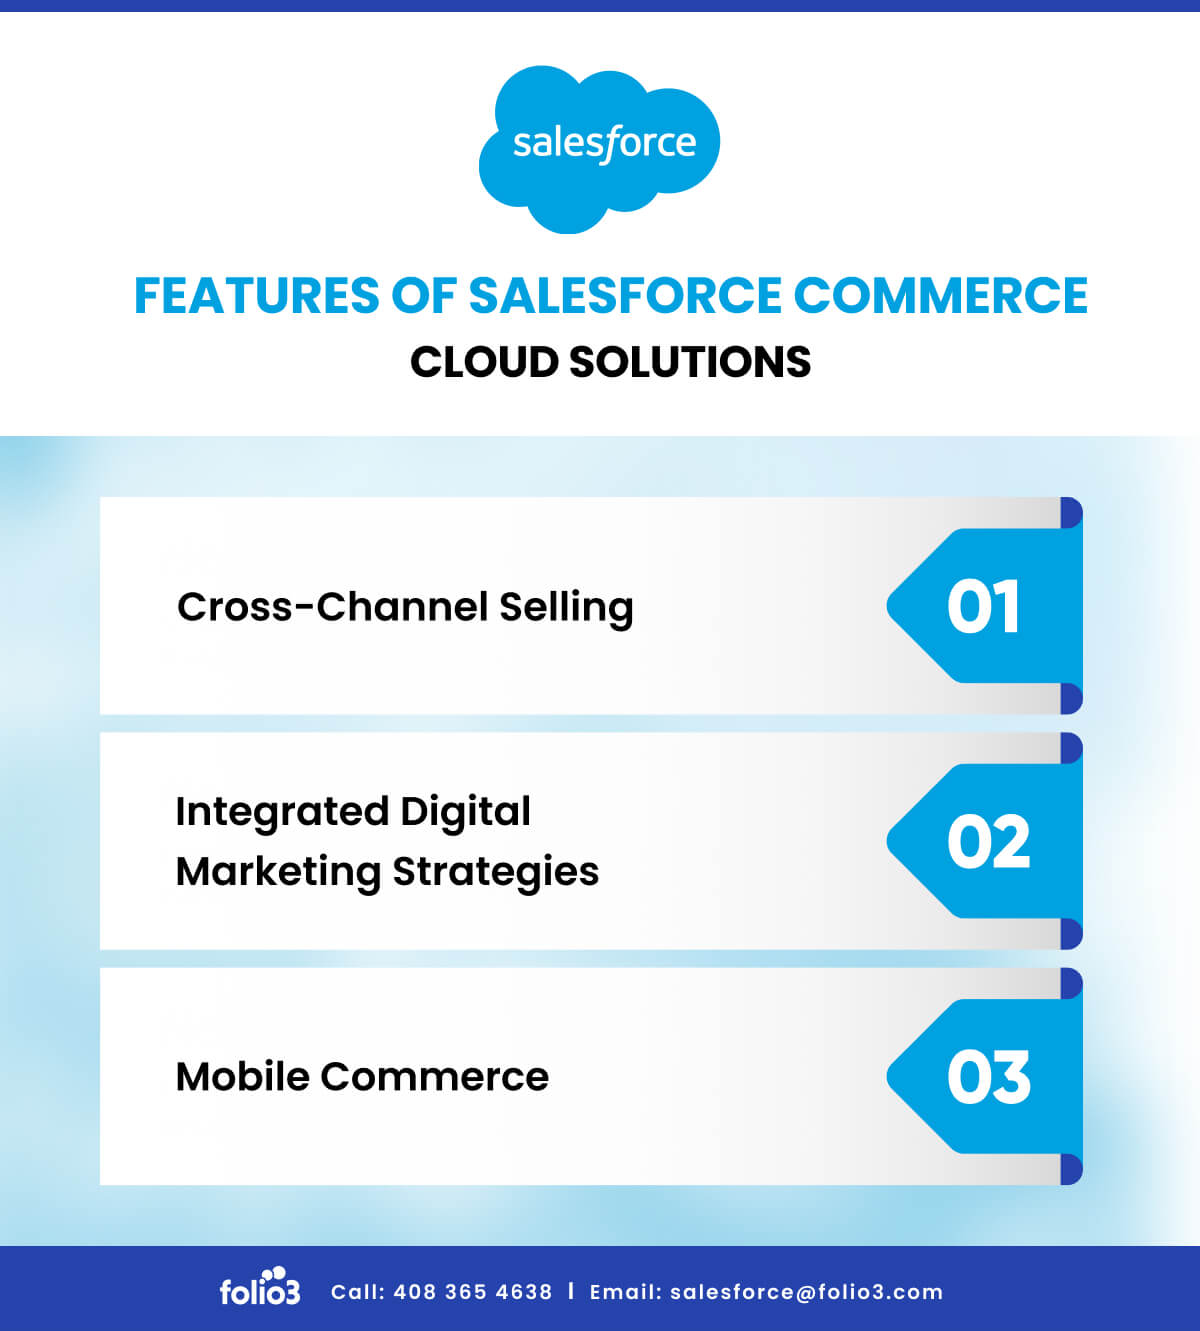 Features of Salesforce Commerce Cloud Solutions